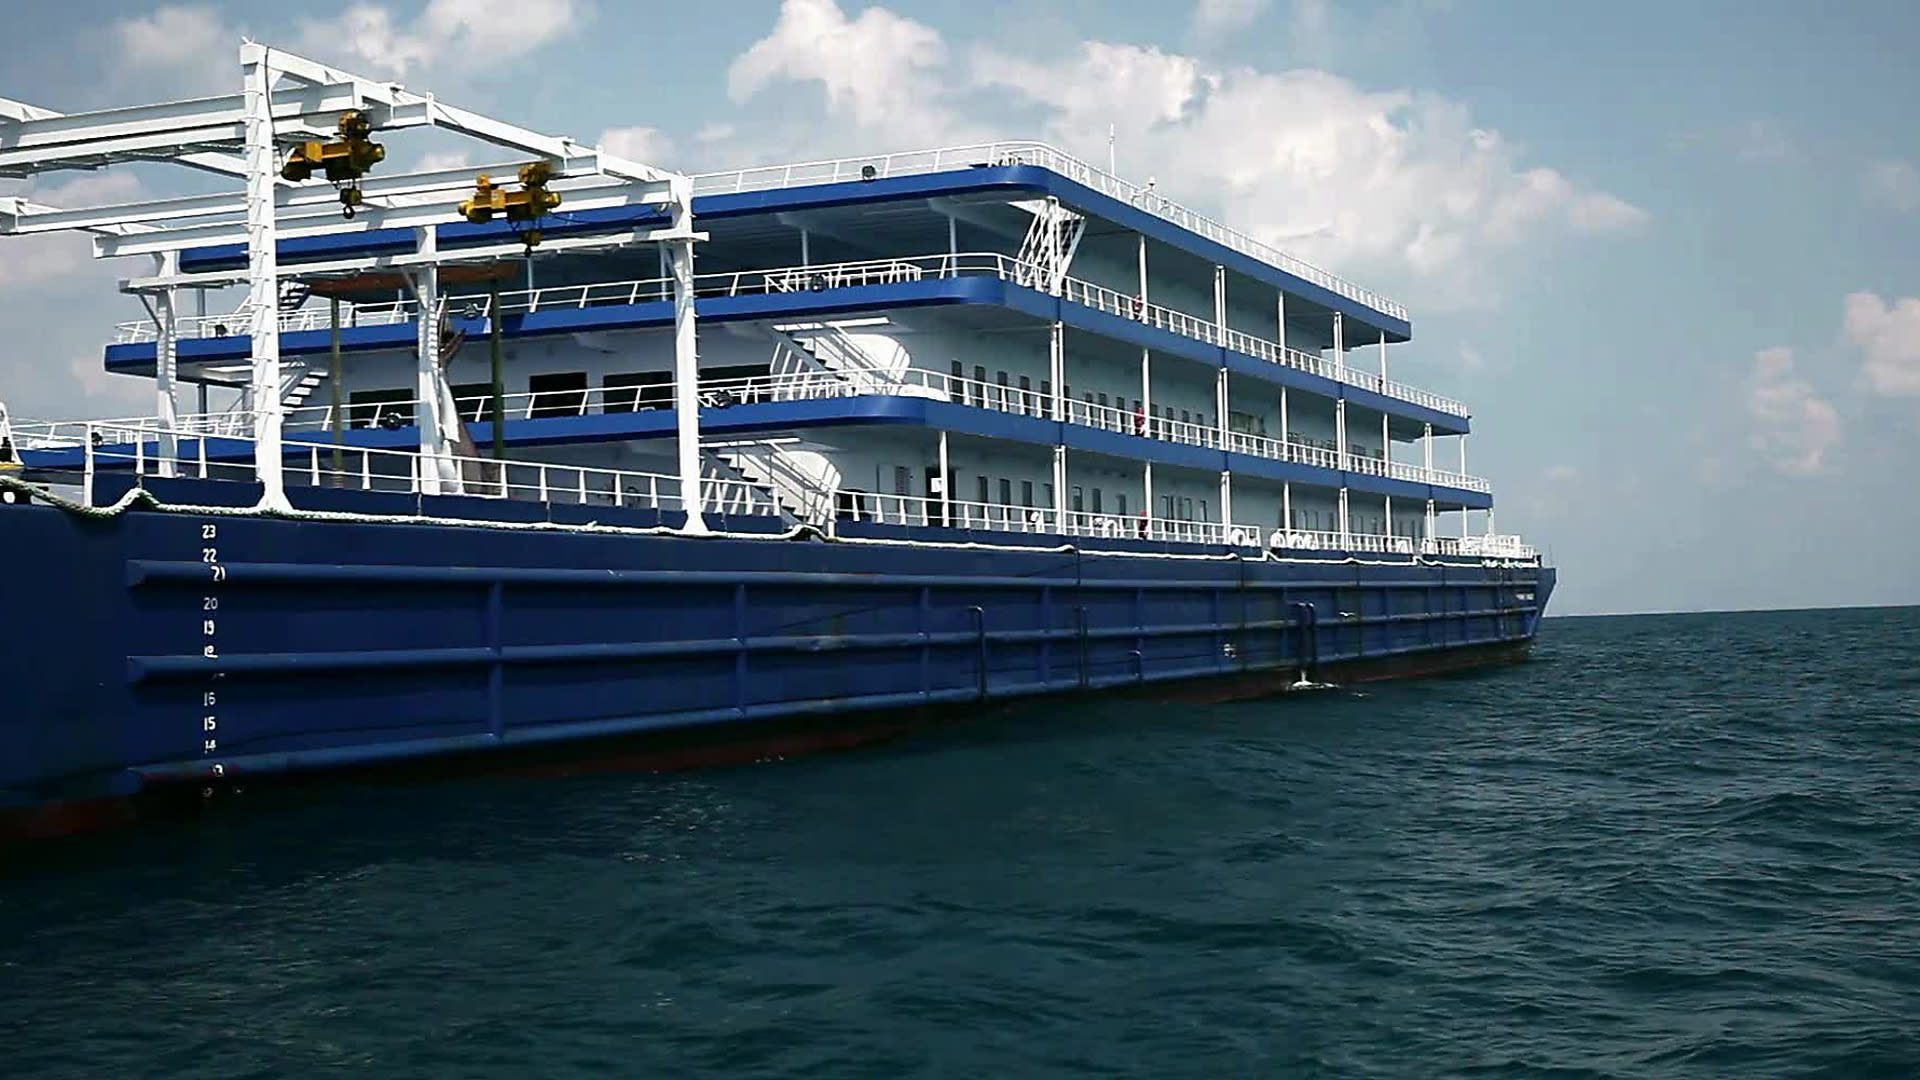 This Giant Barge is Actually a $25M Floating Boutique Hotel [Video]